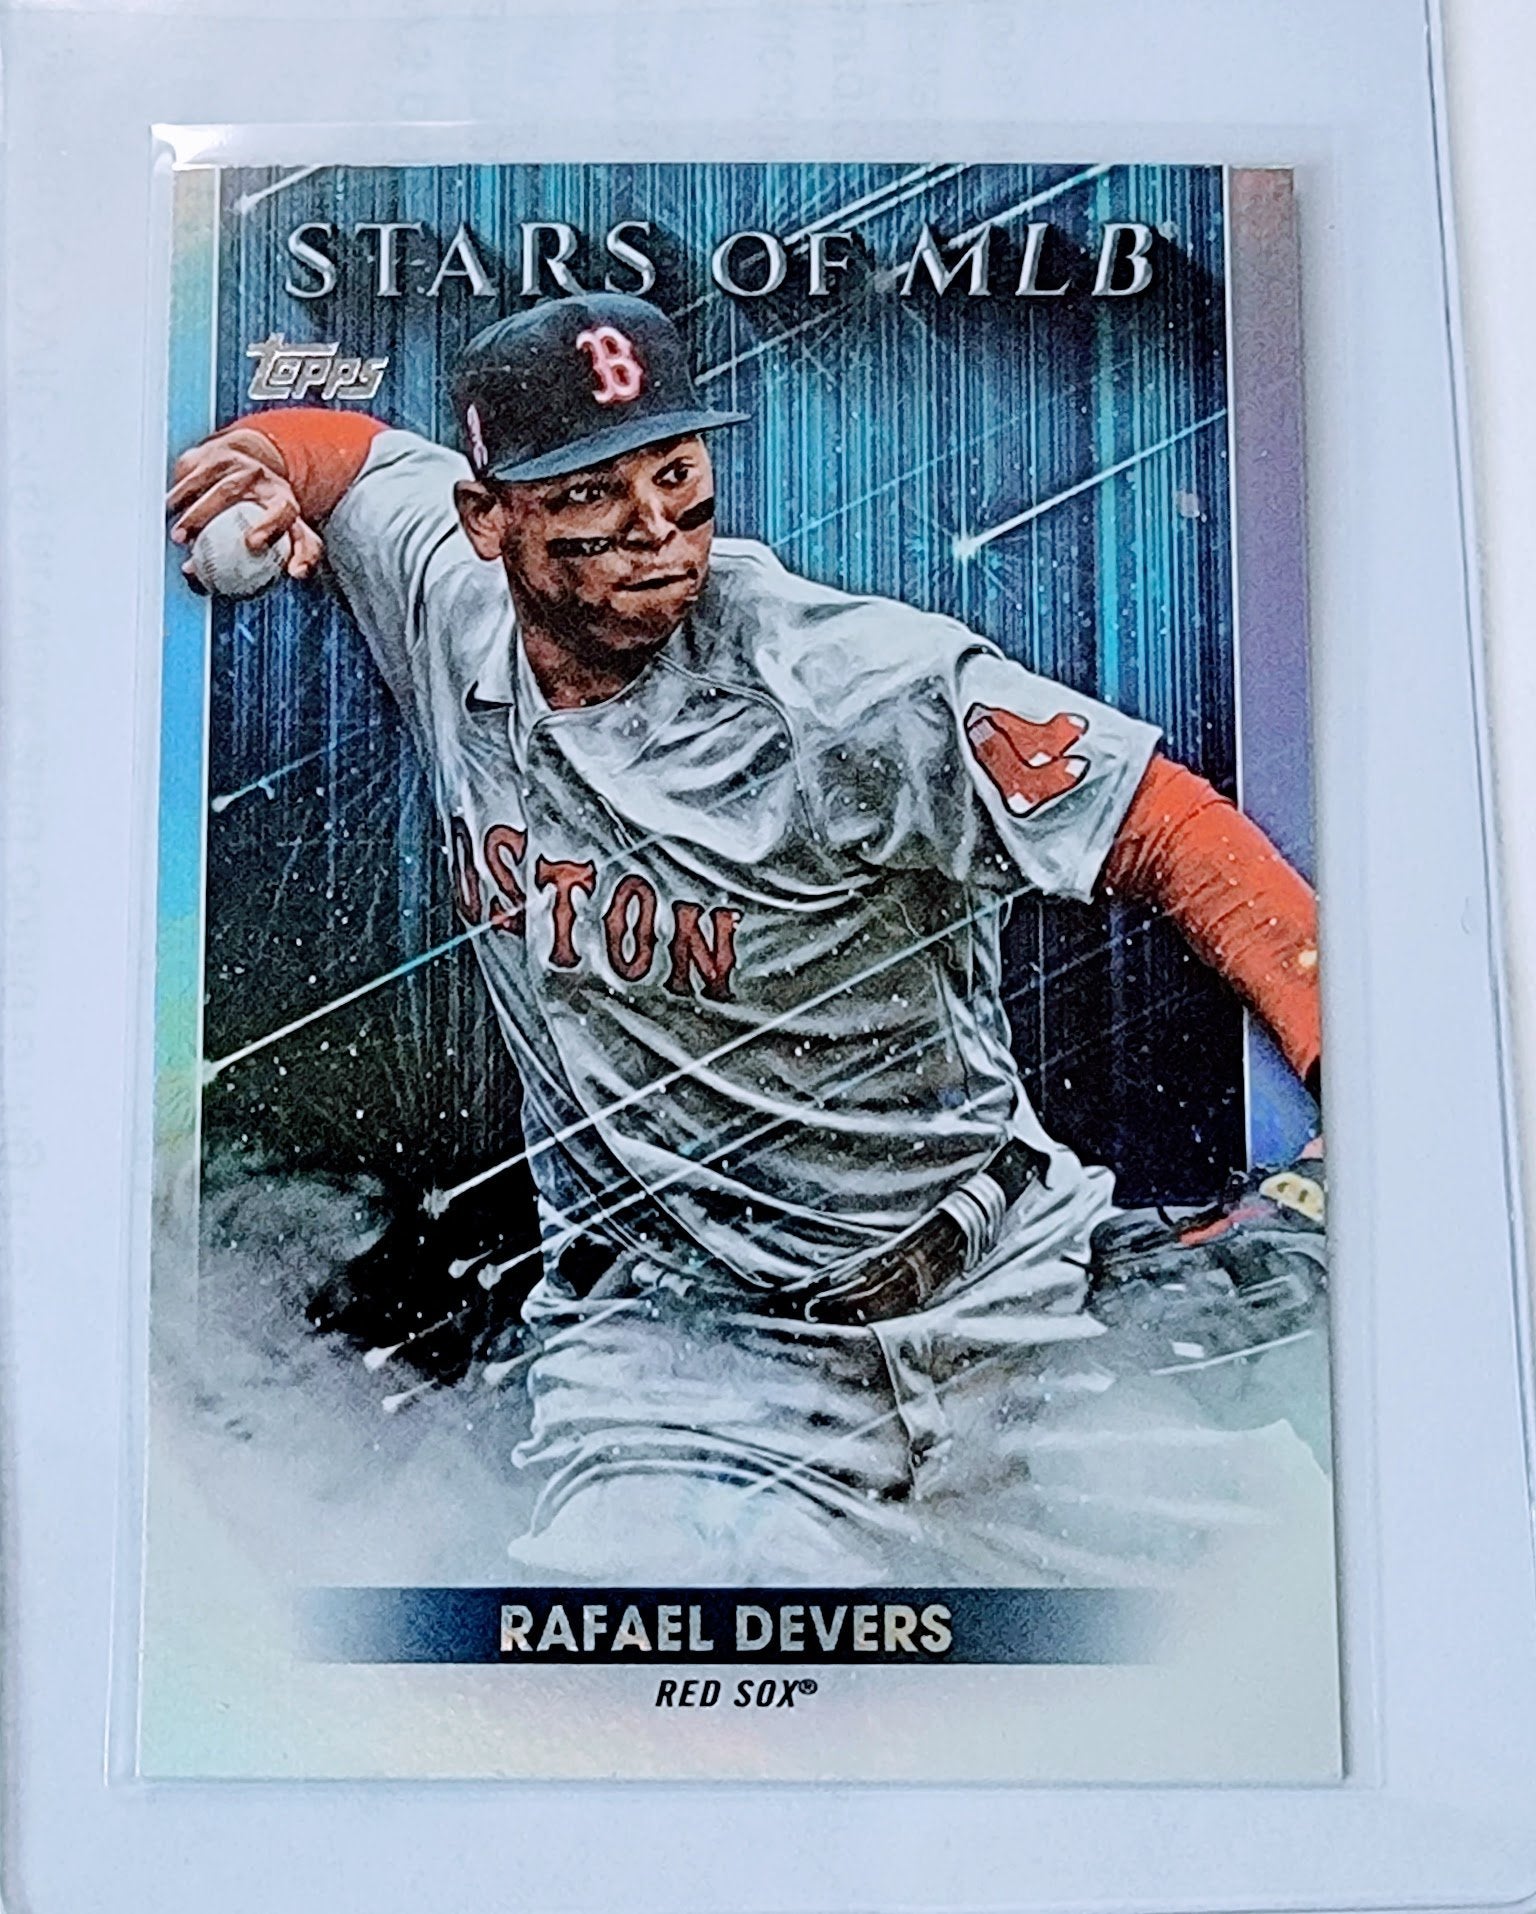 2022 Topps Rafael Devers Stars of the MLB Baseball Trading Card GRB1 simple Xclusive Collectibles   